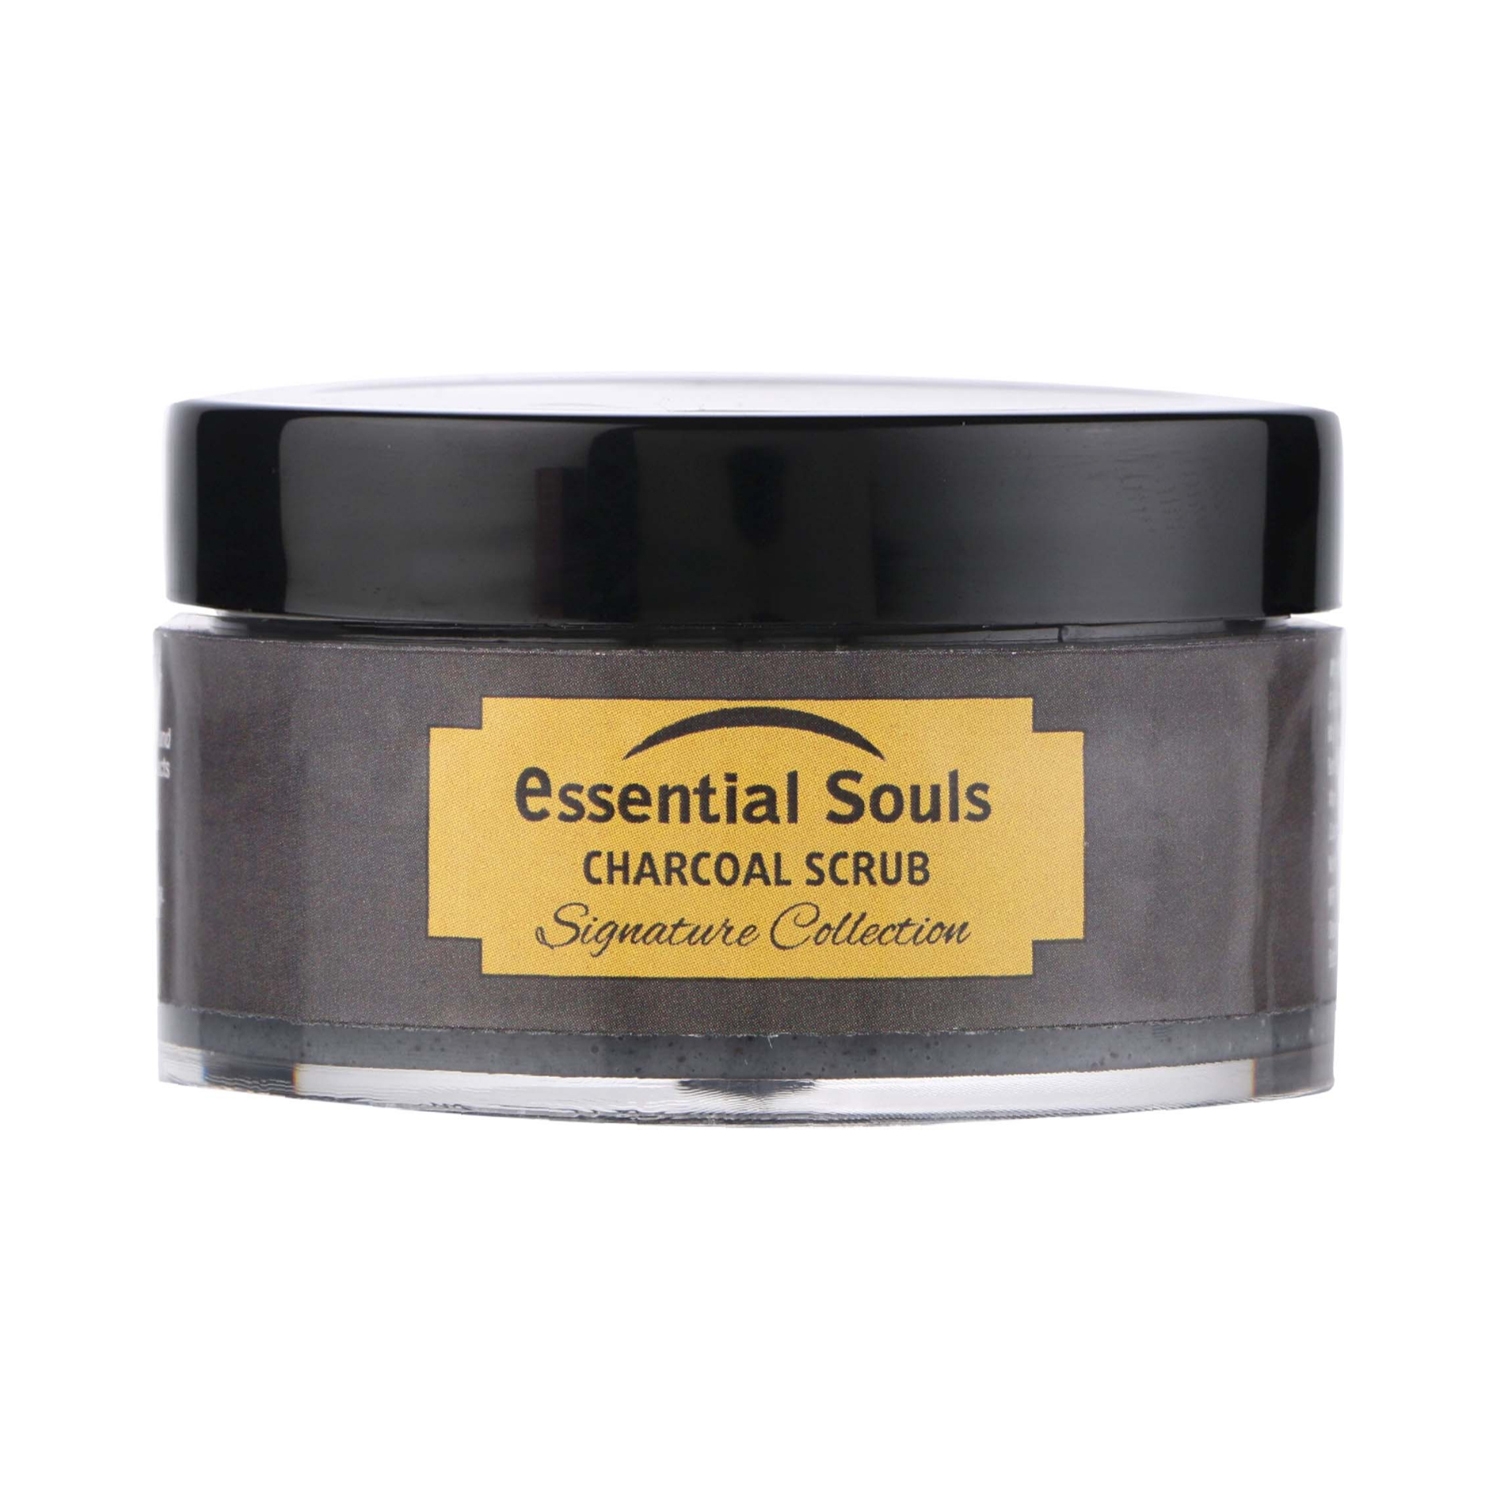 Essential Souls Signature Collection Charcoal Scrub (50g)